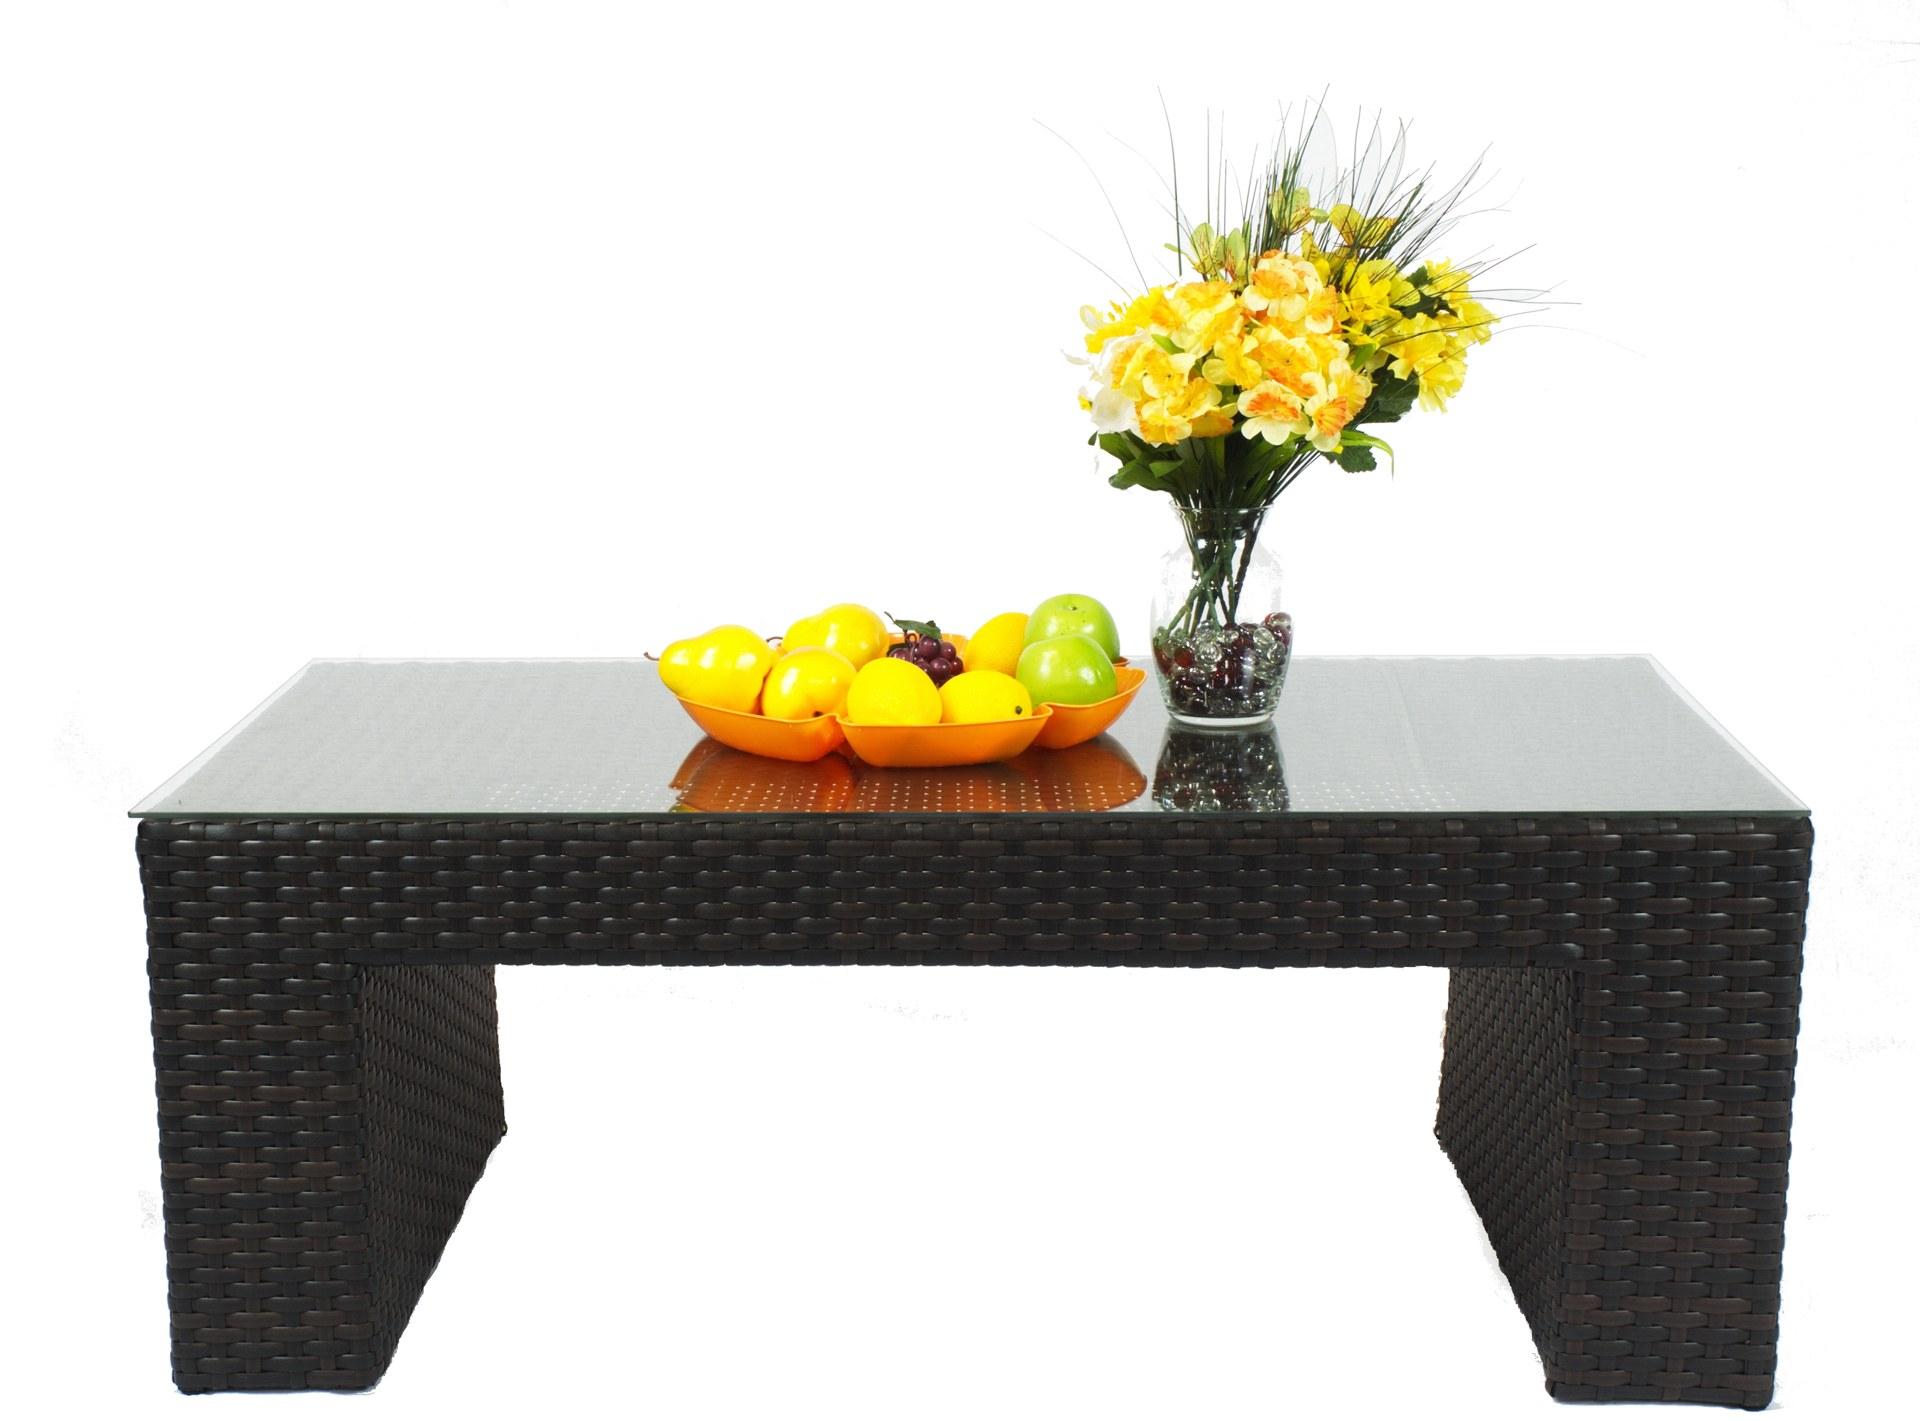 

    
Aztec Wicker on Aluminum Frame Rectangle Coffee Table w/Glass Top CaliPatio
